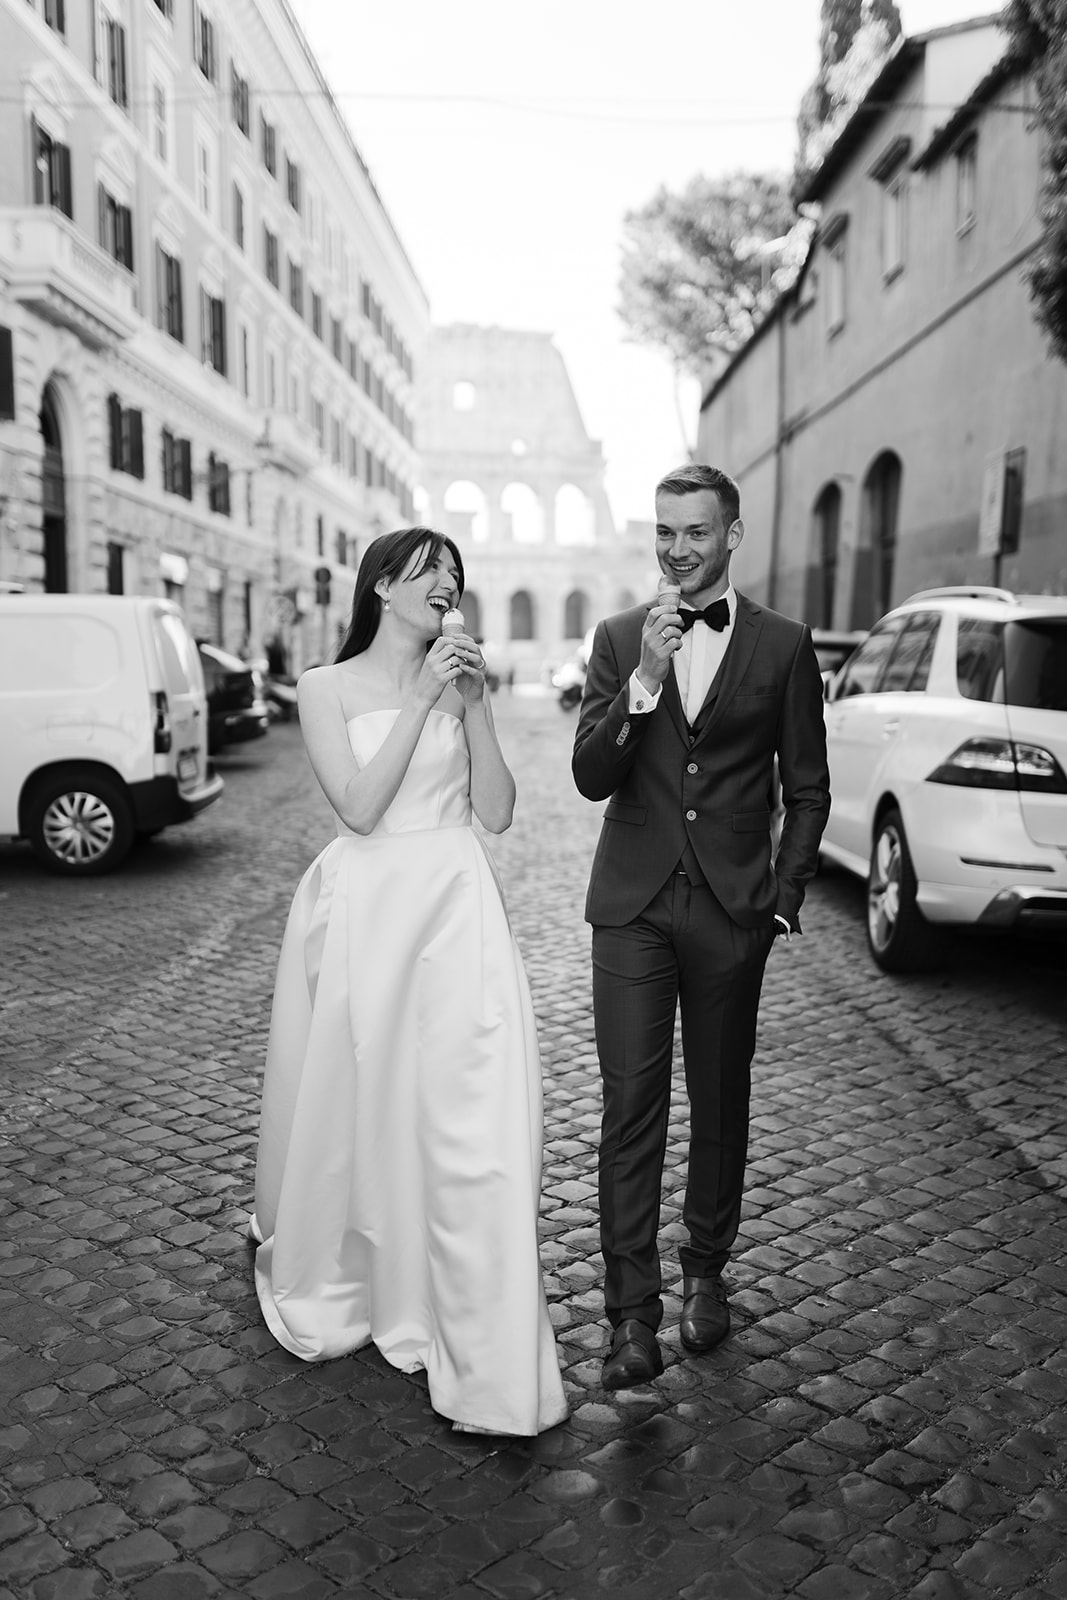 After wedding photoshoot in Rome. Wedding photos with gelato and the Colosseo photographed by Clara Buchberger